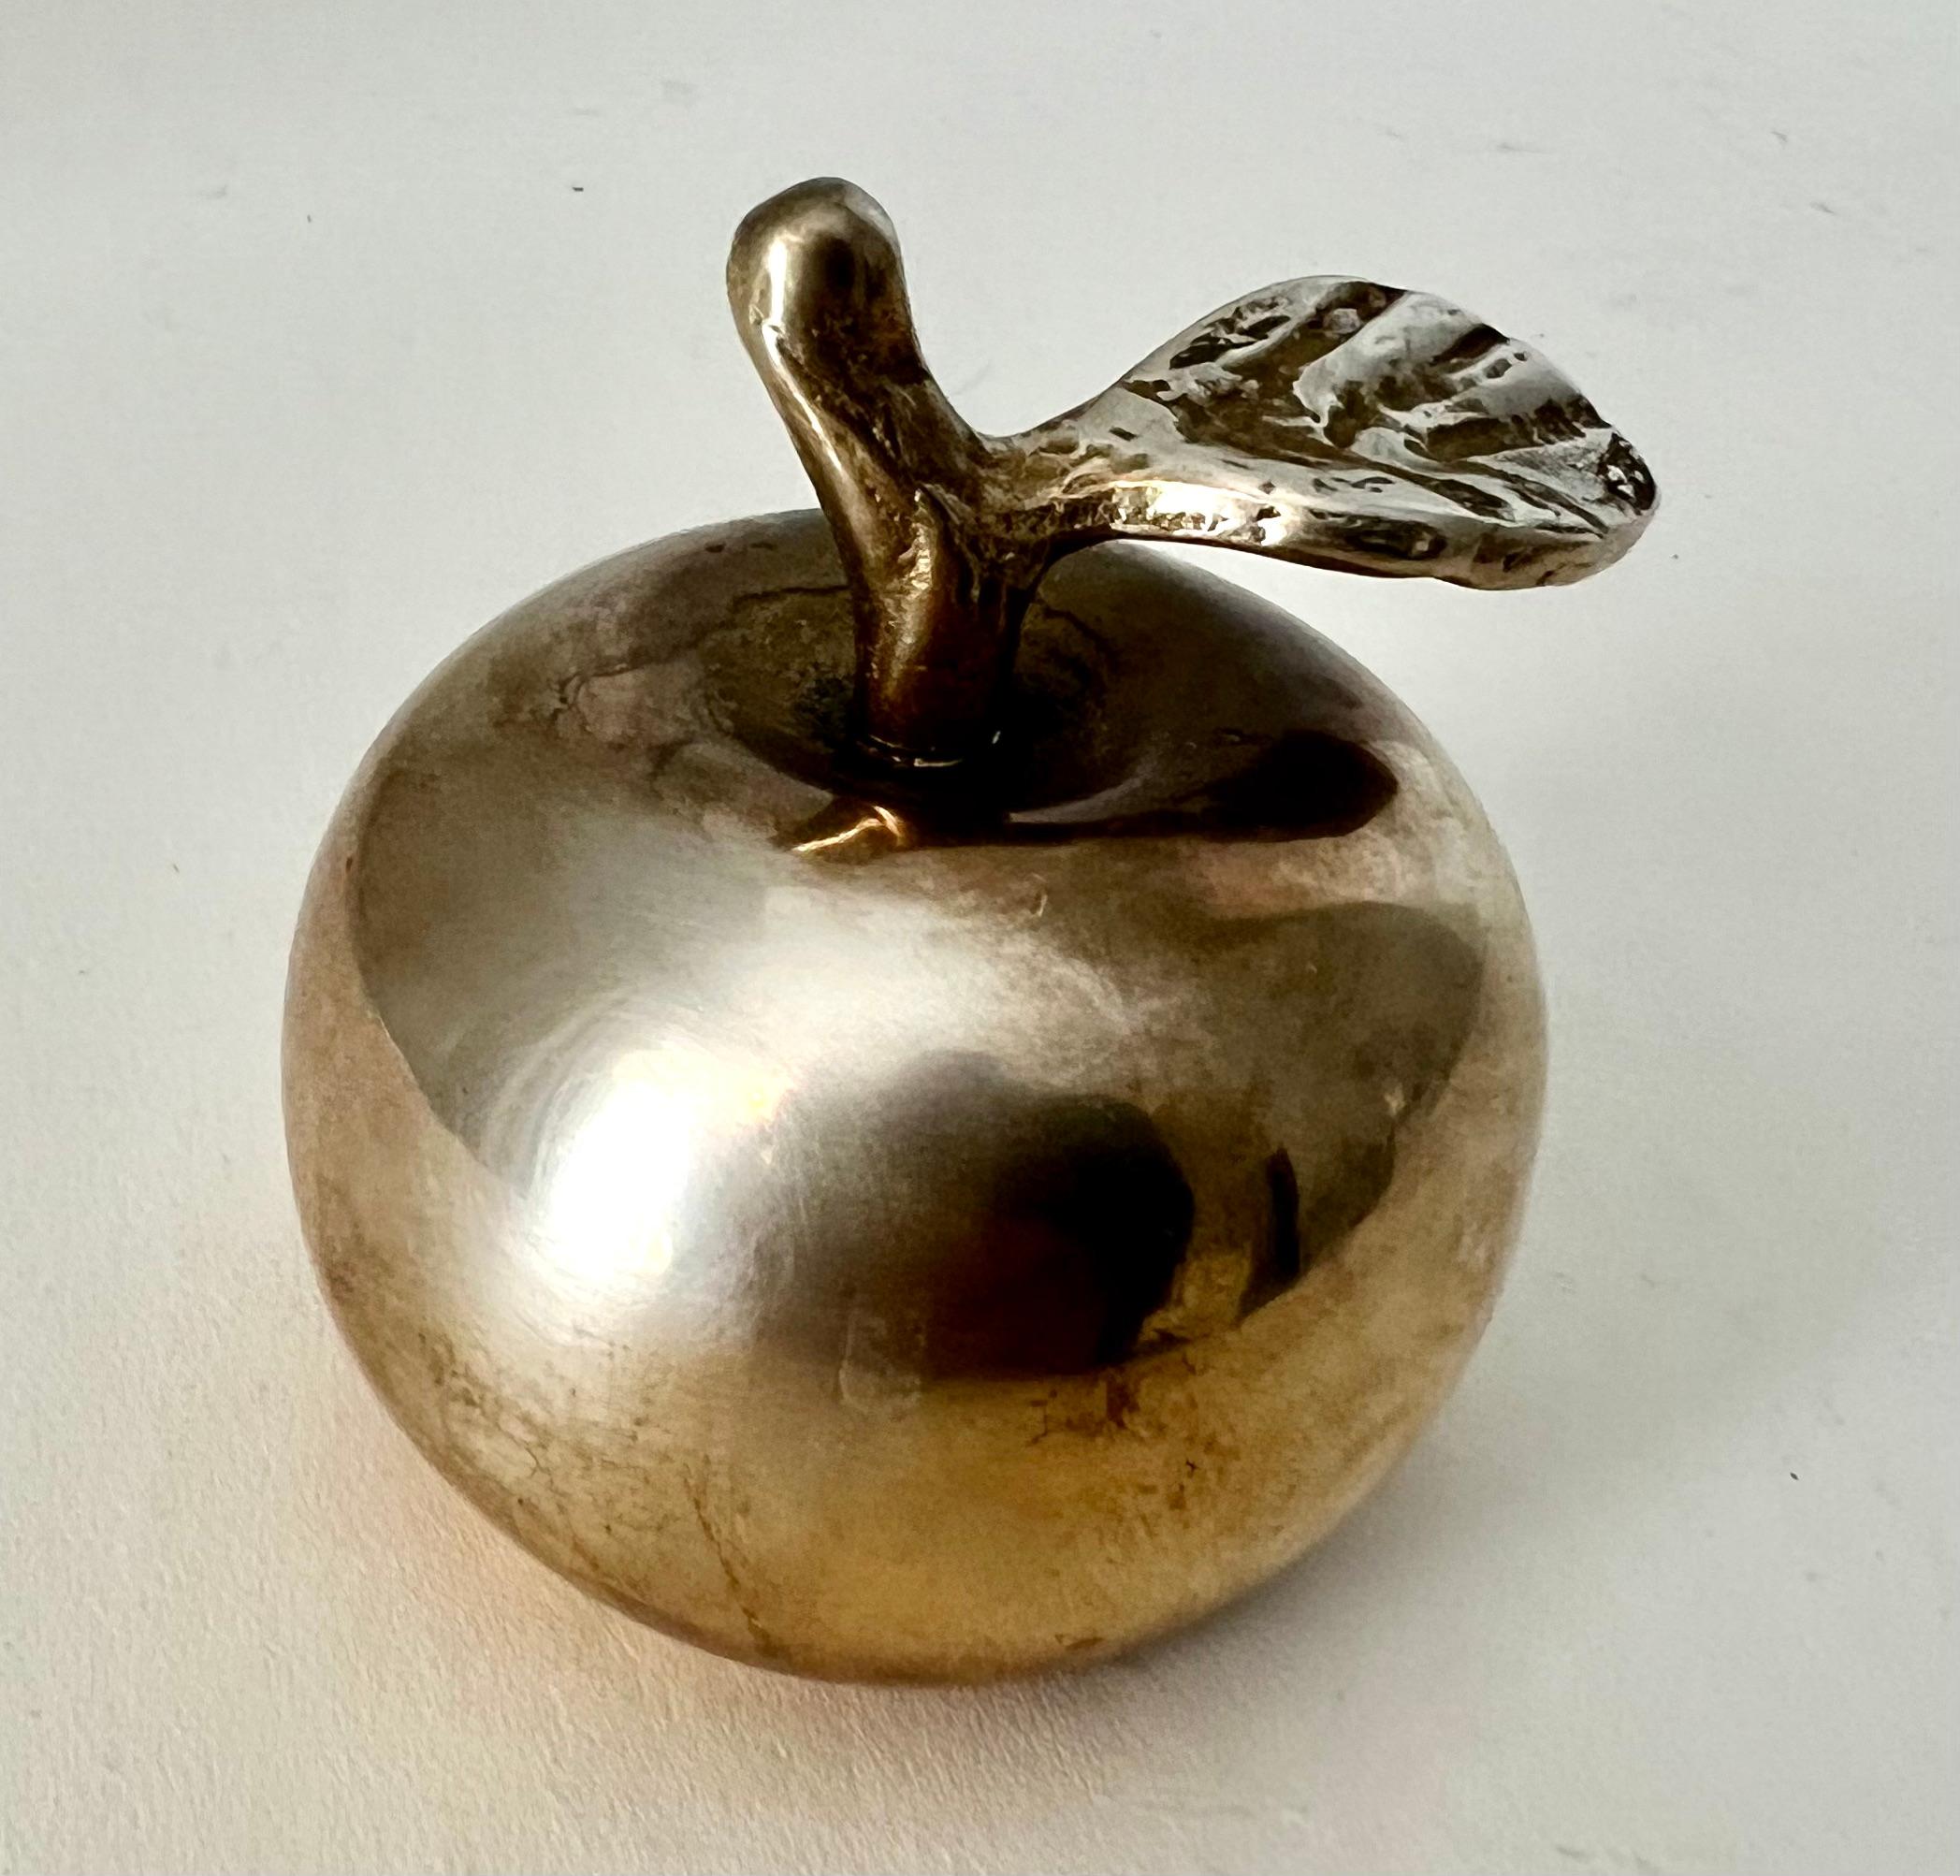 A Brass Apple and a bell. A novel piece, perhaps for the desk or work station, or babies room.. and always a gift for your favorite teacher. The bell has a nice sound.